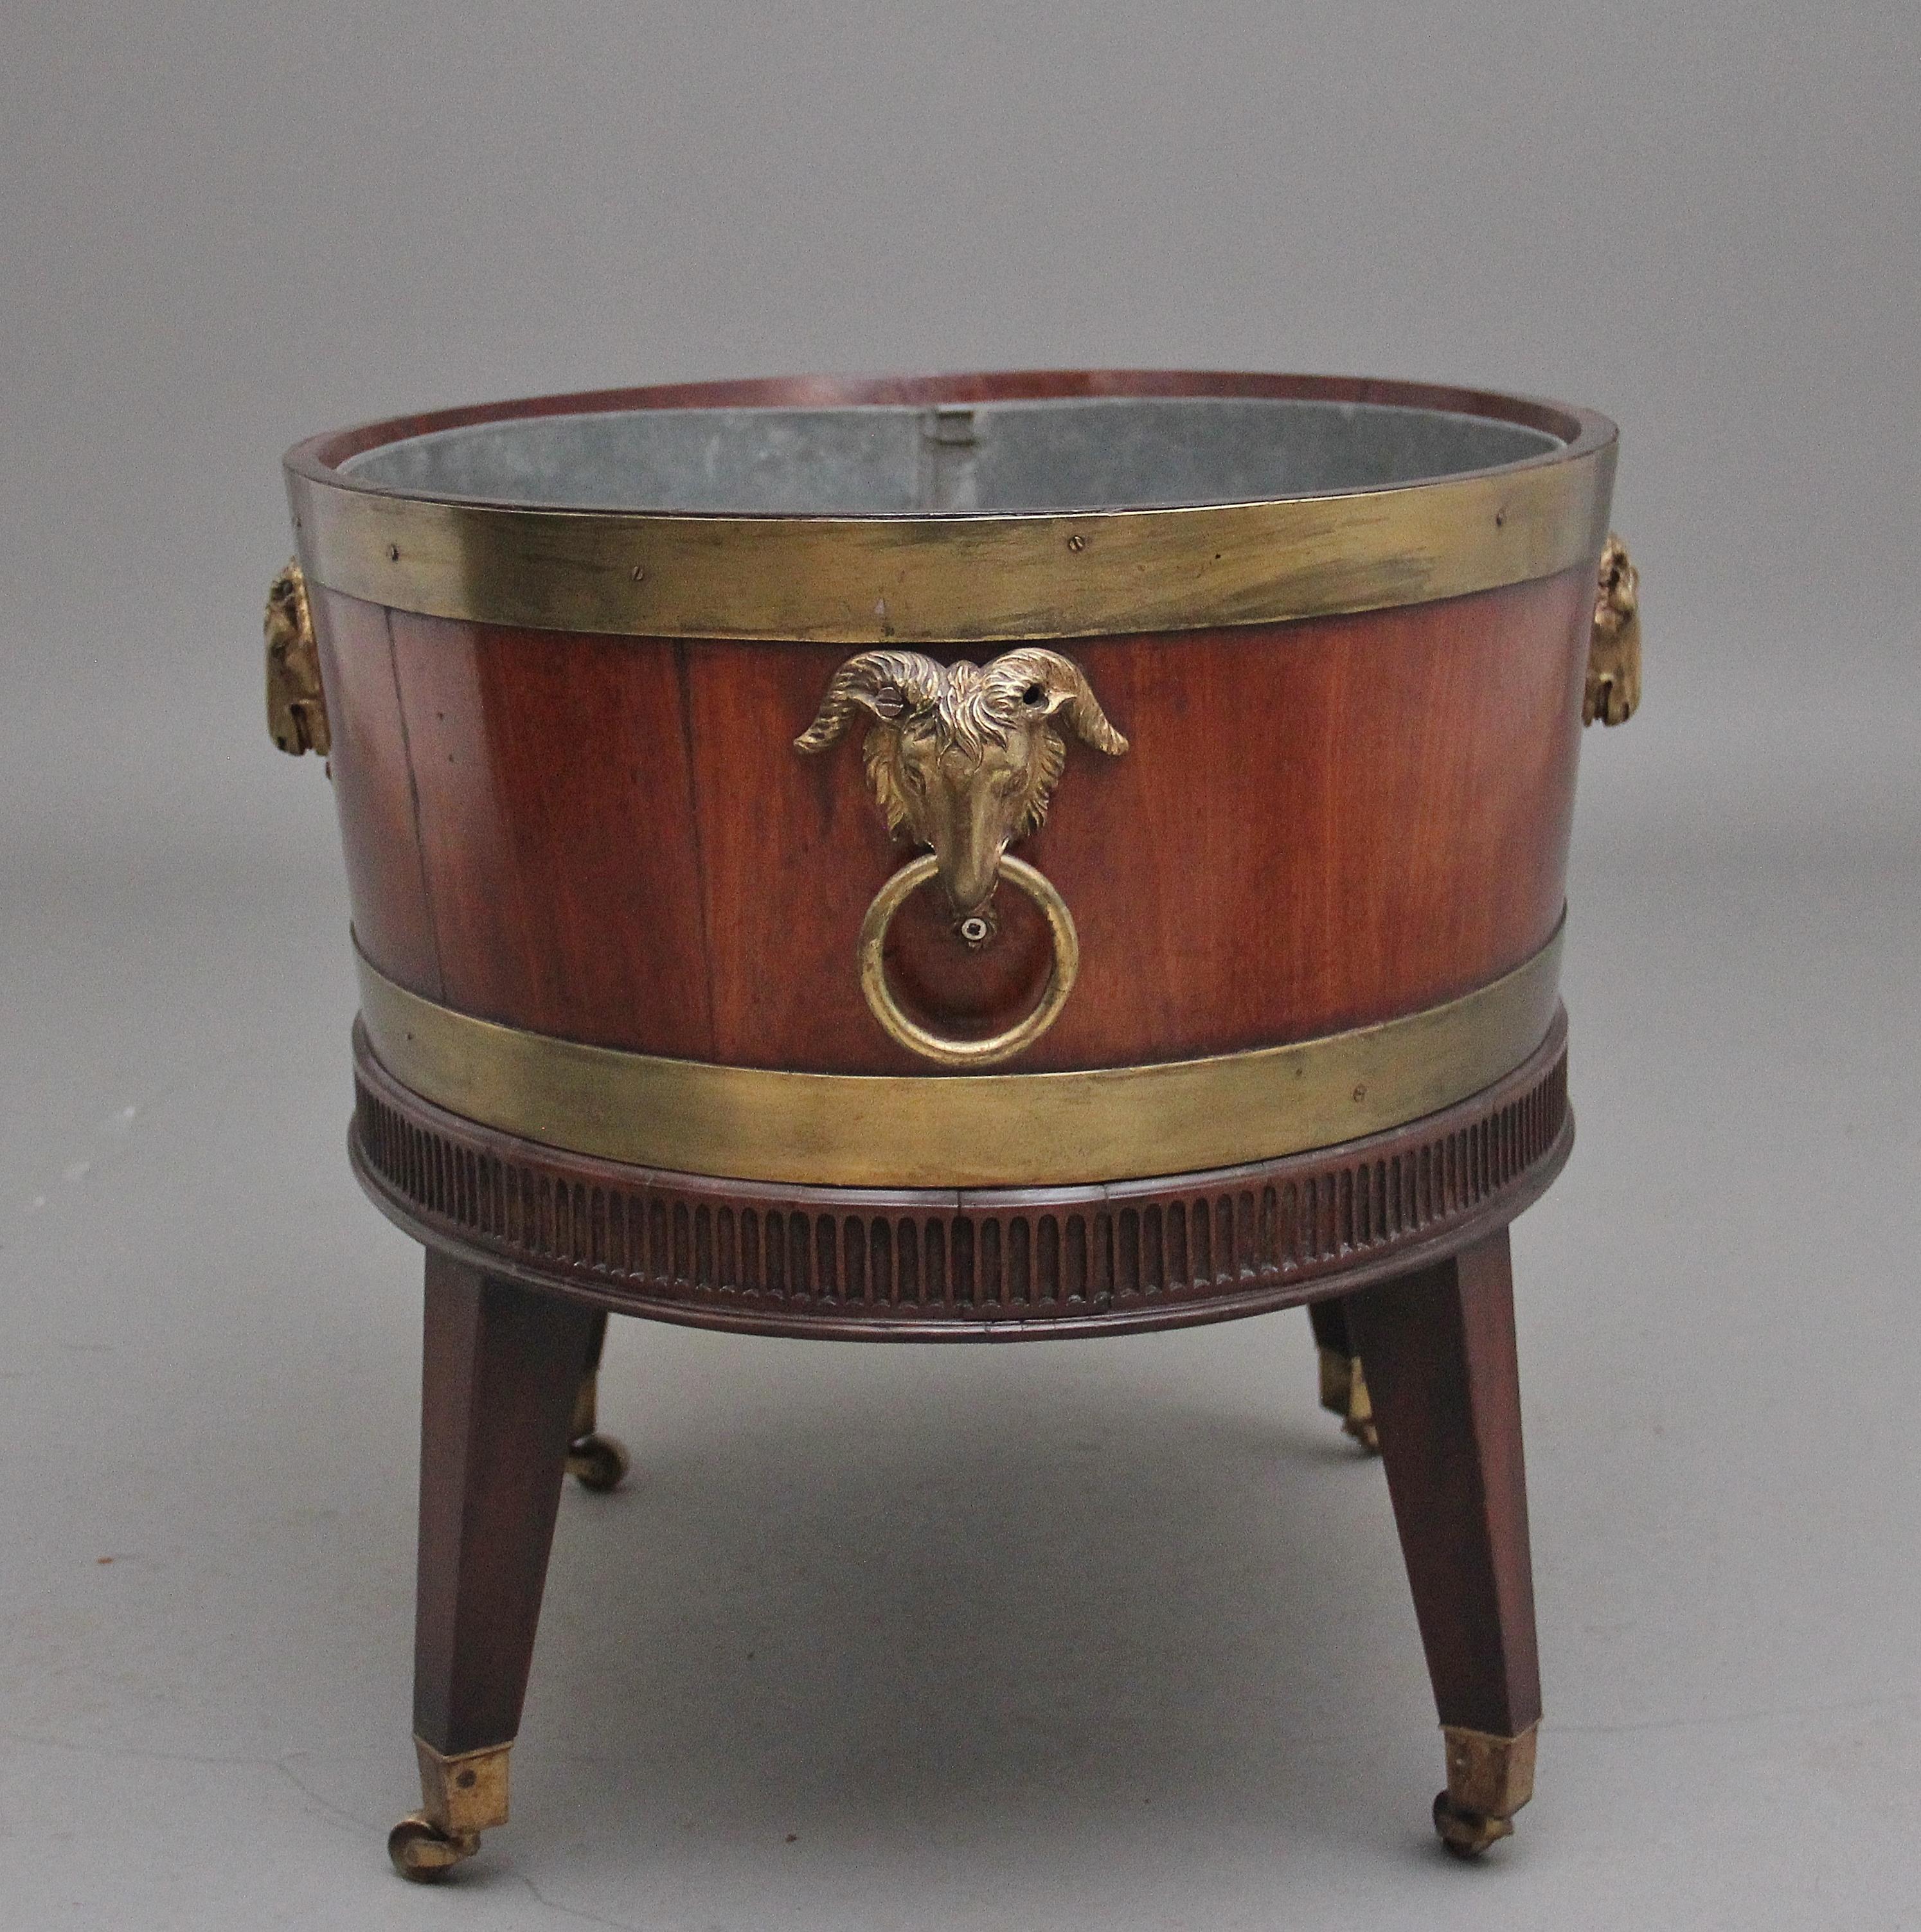 British Highly Decorative Early 19th Century Mahogany and Brass Bound Wine Cooler For Sale